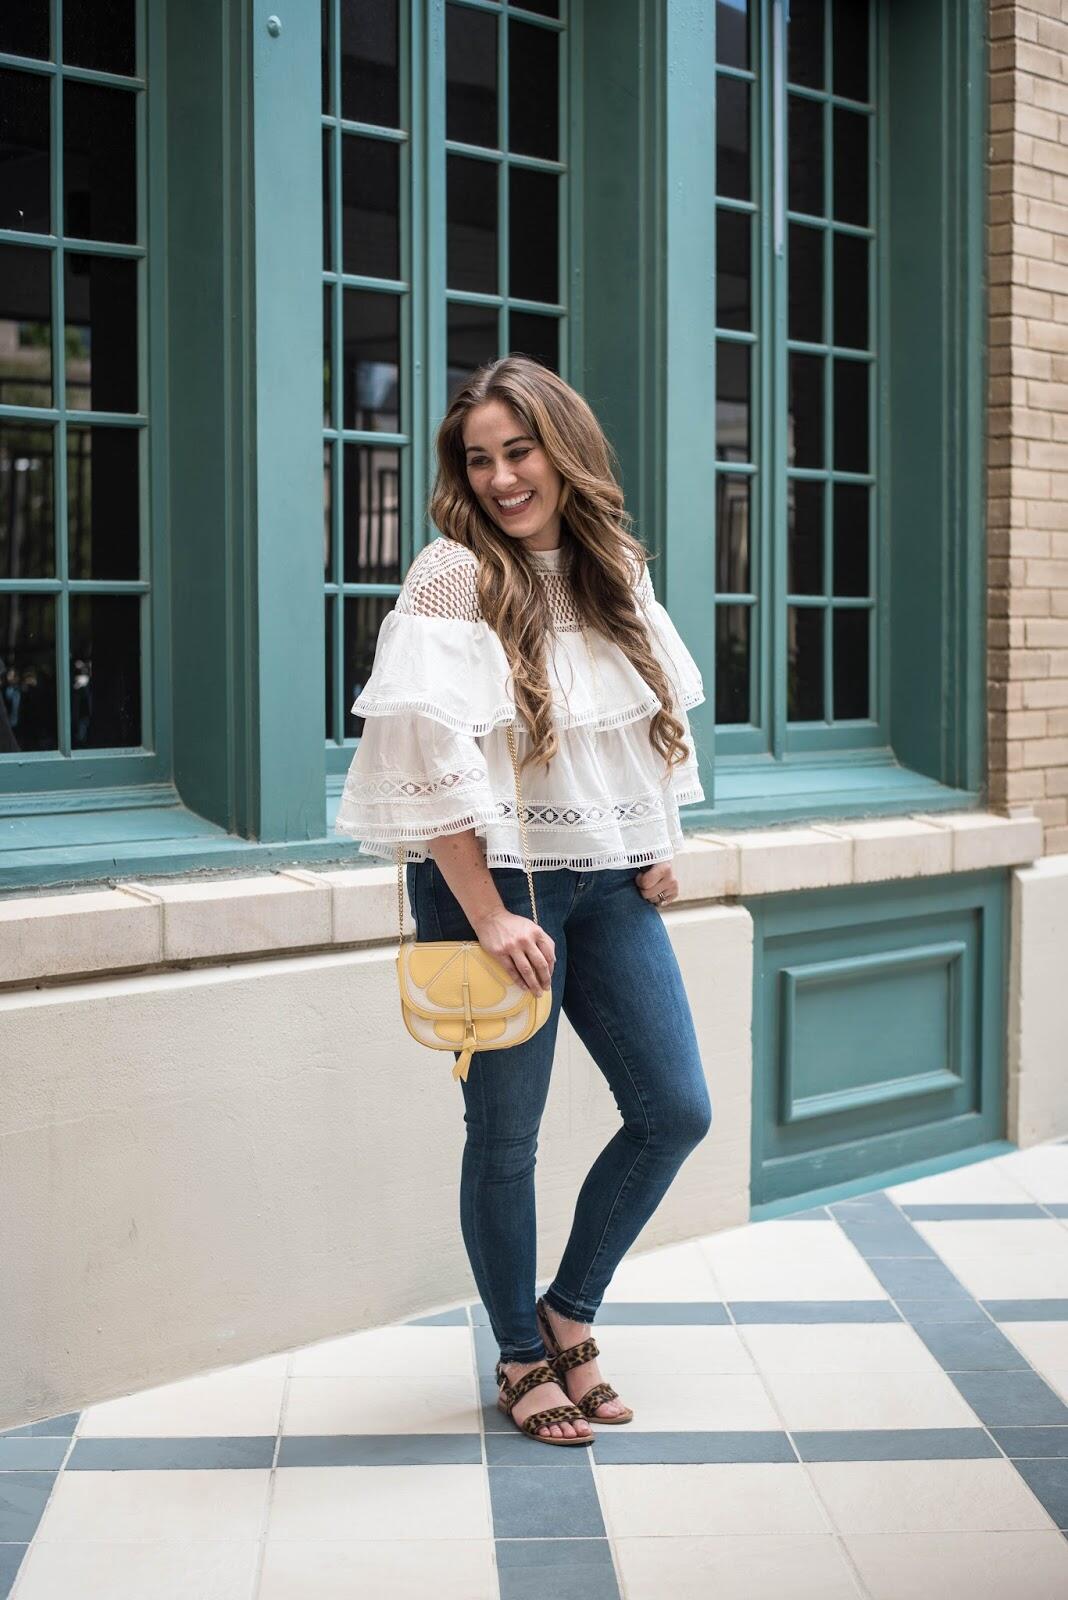 My Favorite Light and Fresh-faced Summer Makeup by fashion blogger Laura of Walking in Memphis in High Heels